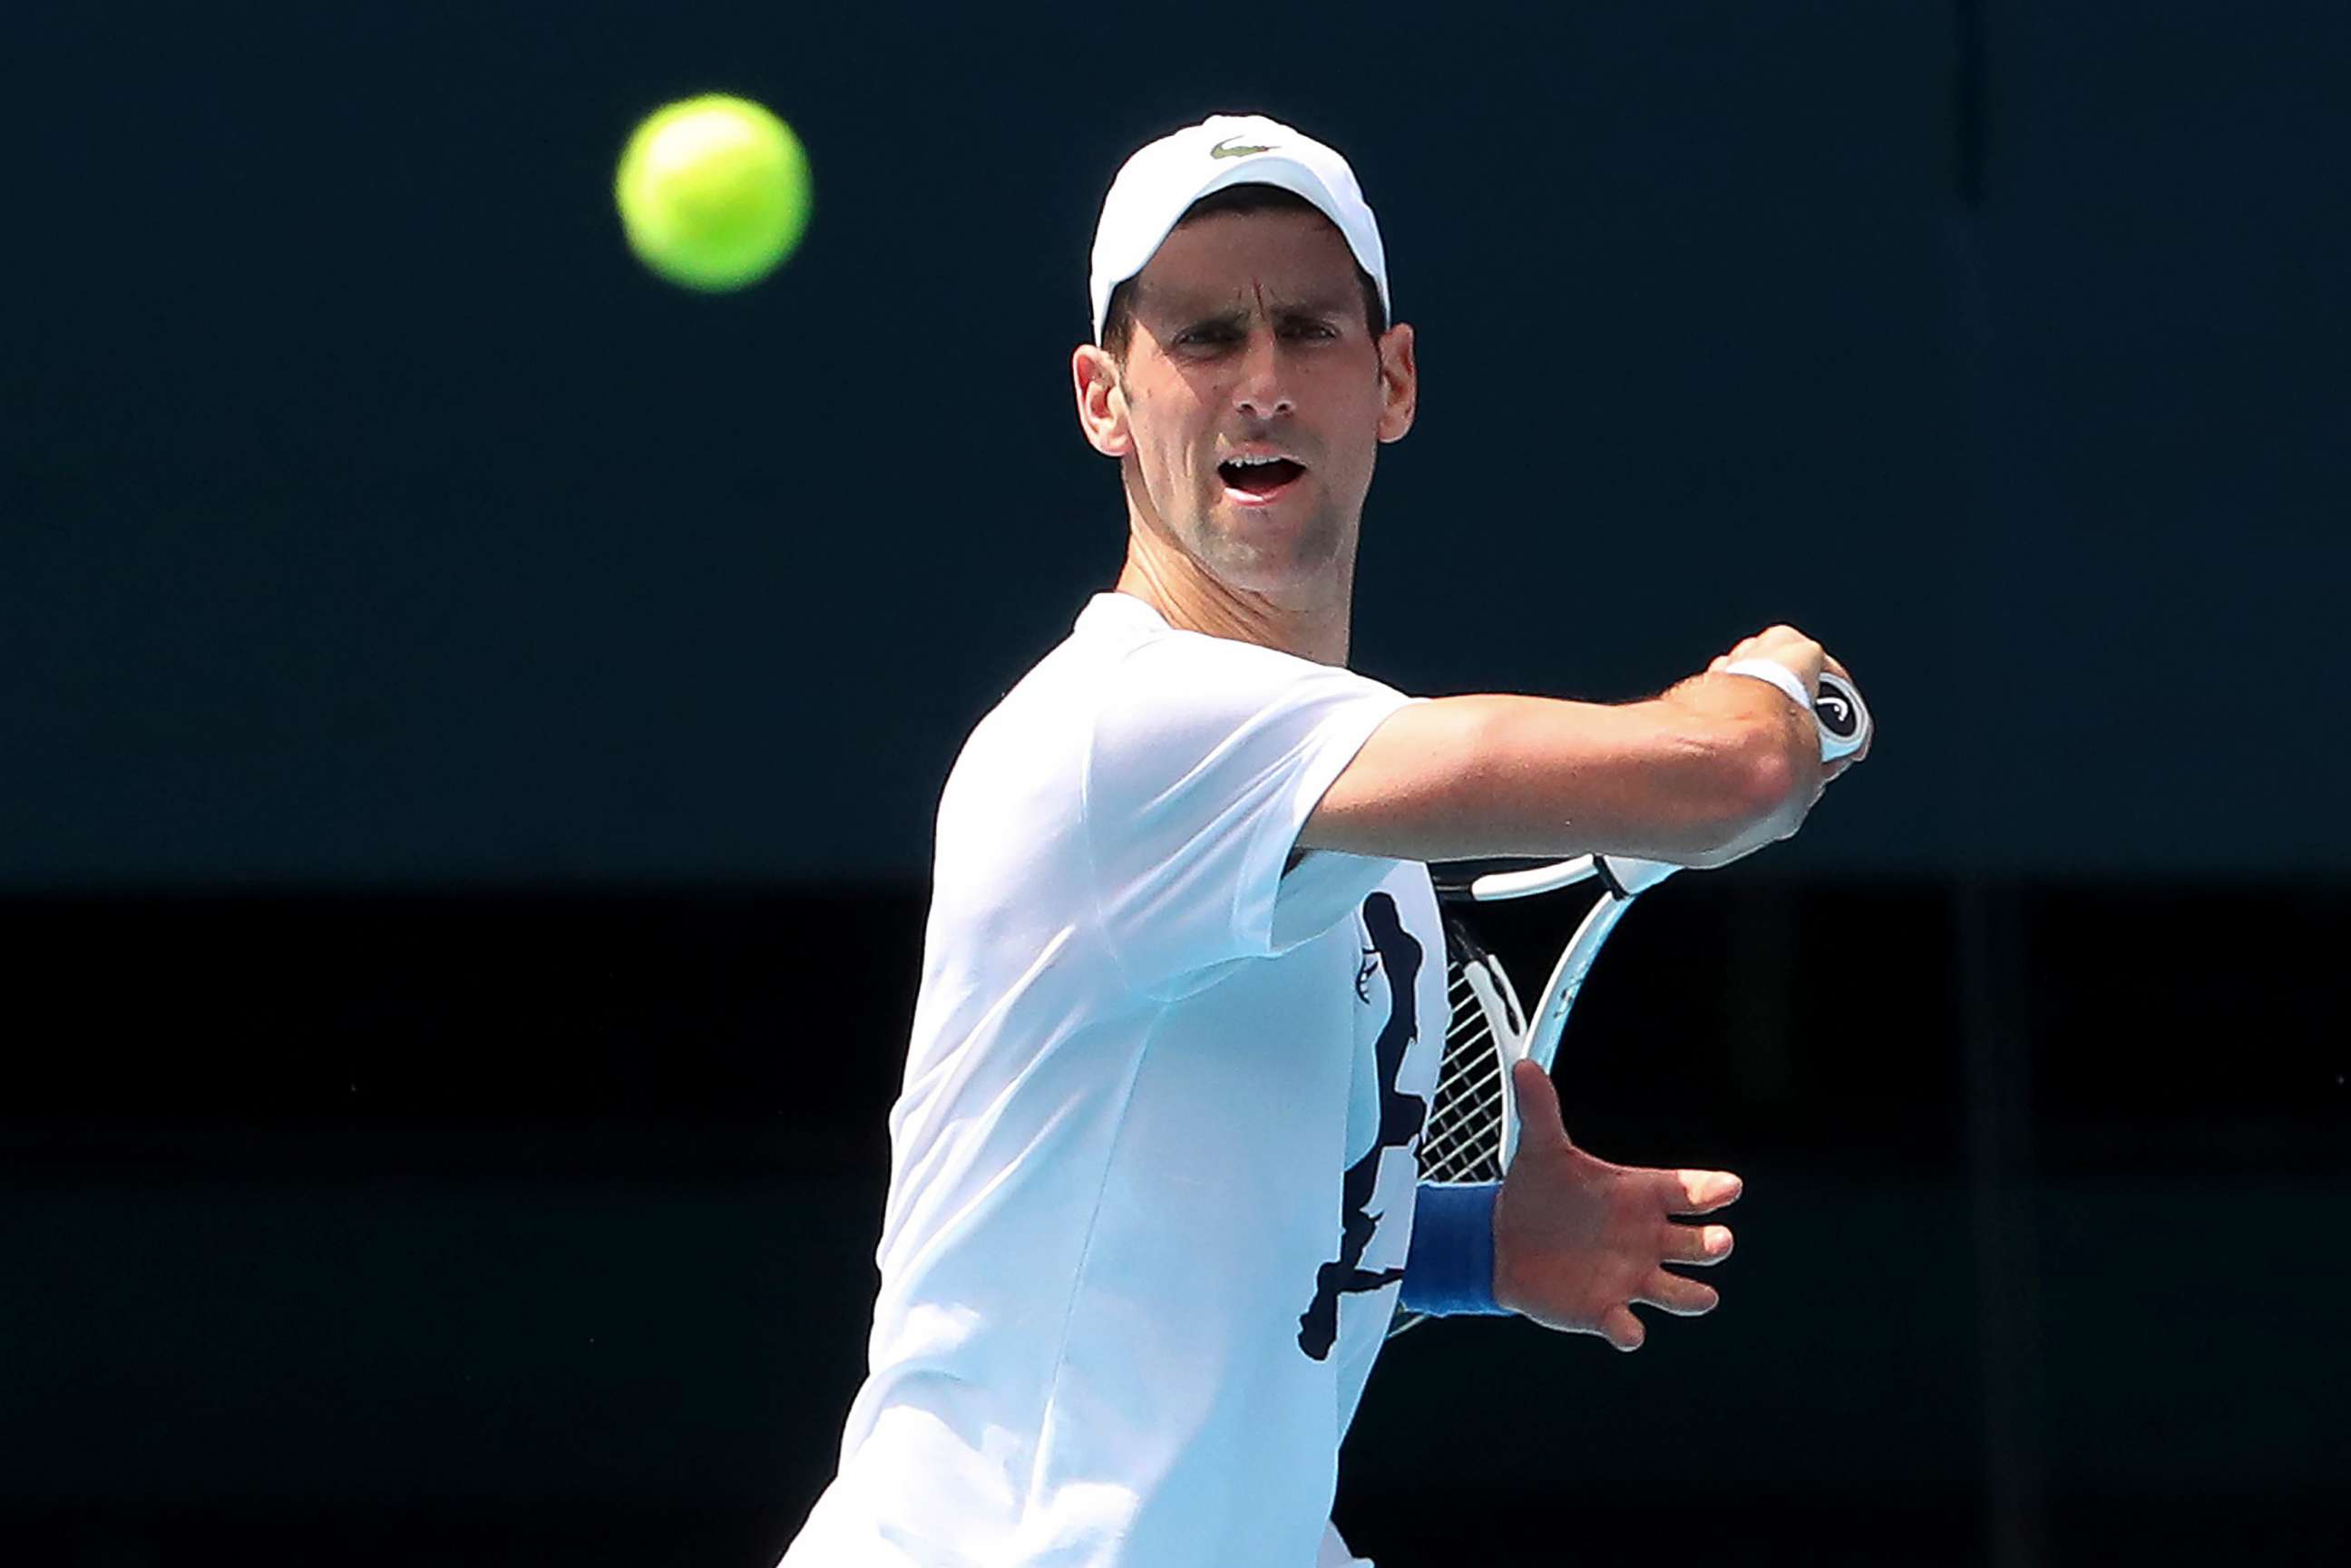 PHOTO: Defending champion Serbia's Novak Djokovic attends a practice session in the Rod Laver Arena ahead of the Australian Open at Melbourne Park in Melbourne, Australia, Jan. 11, 2022. 